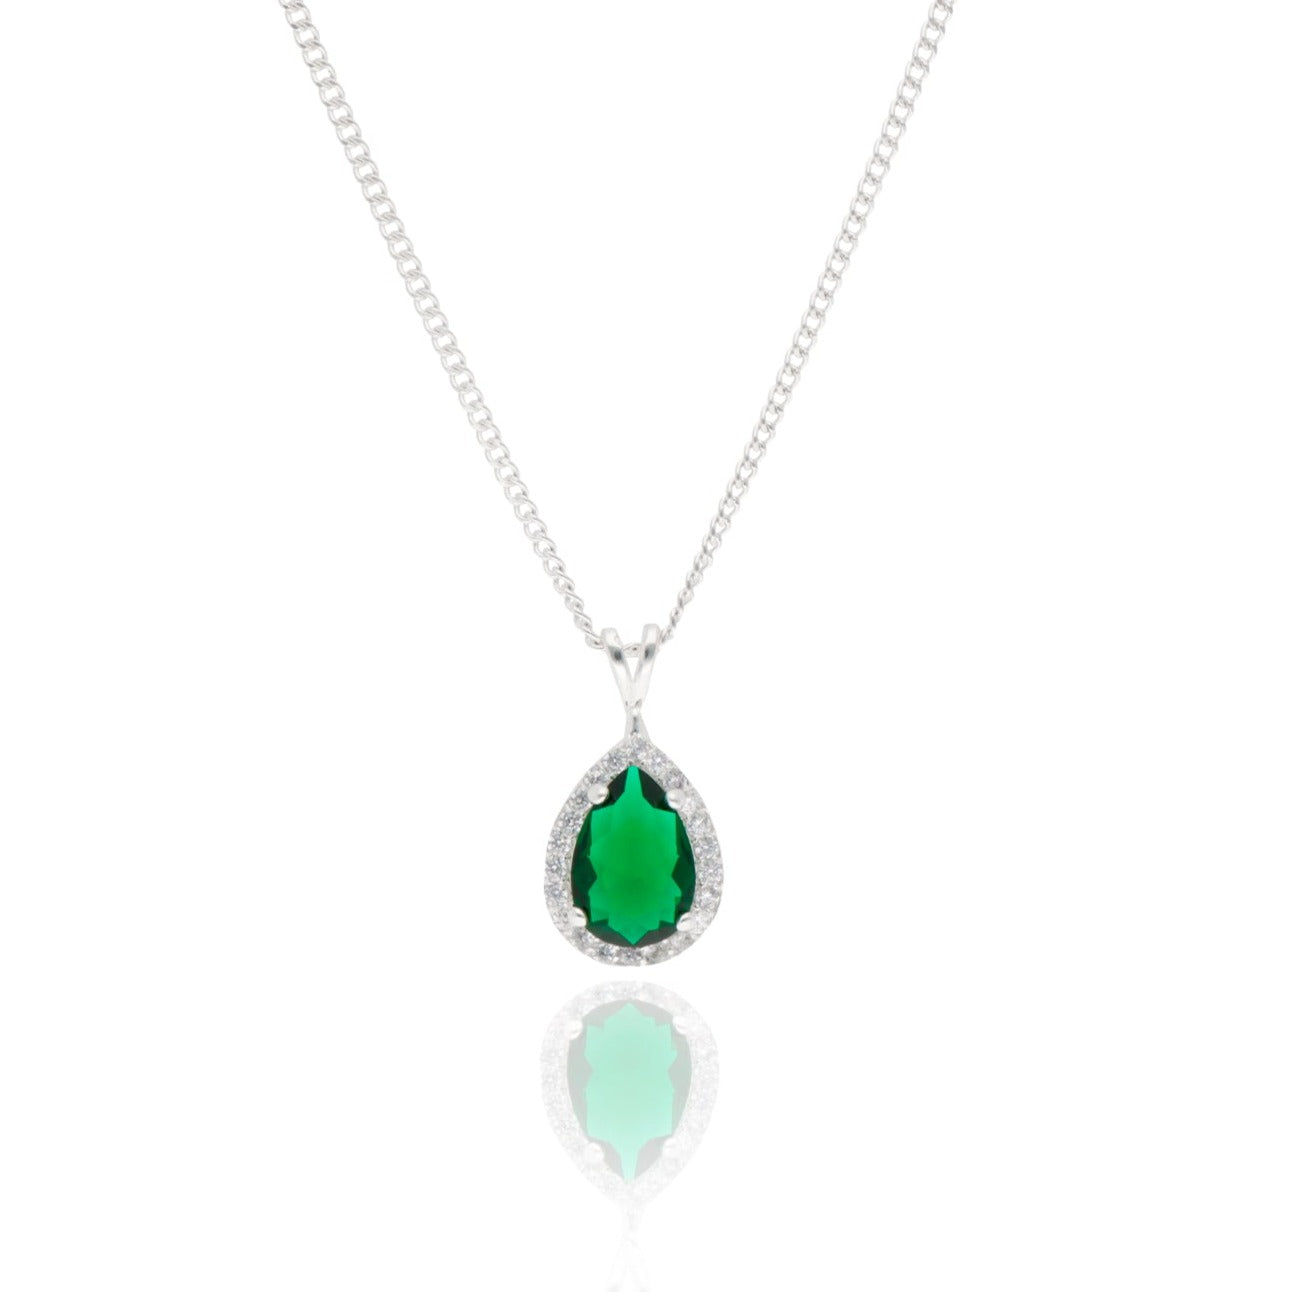 Polet necklace in silver with Green zirconia